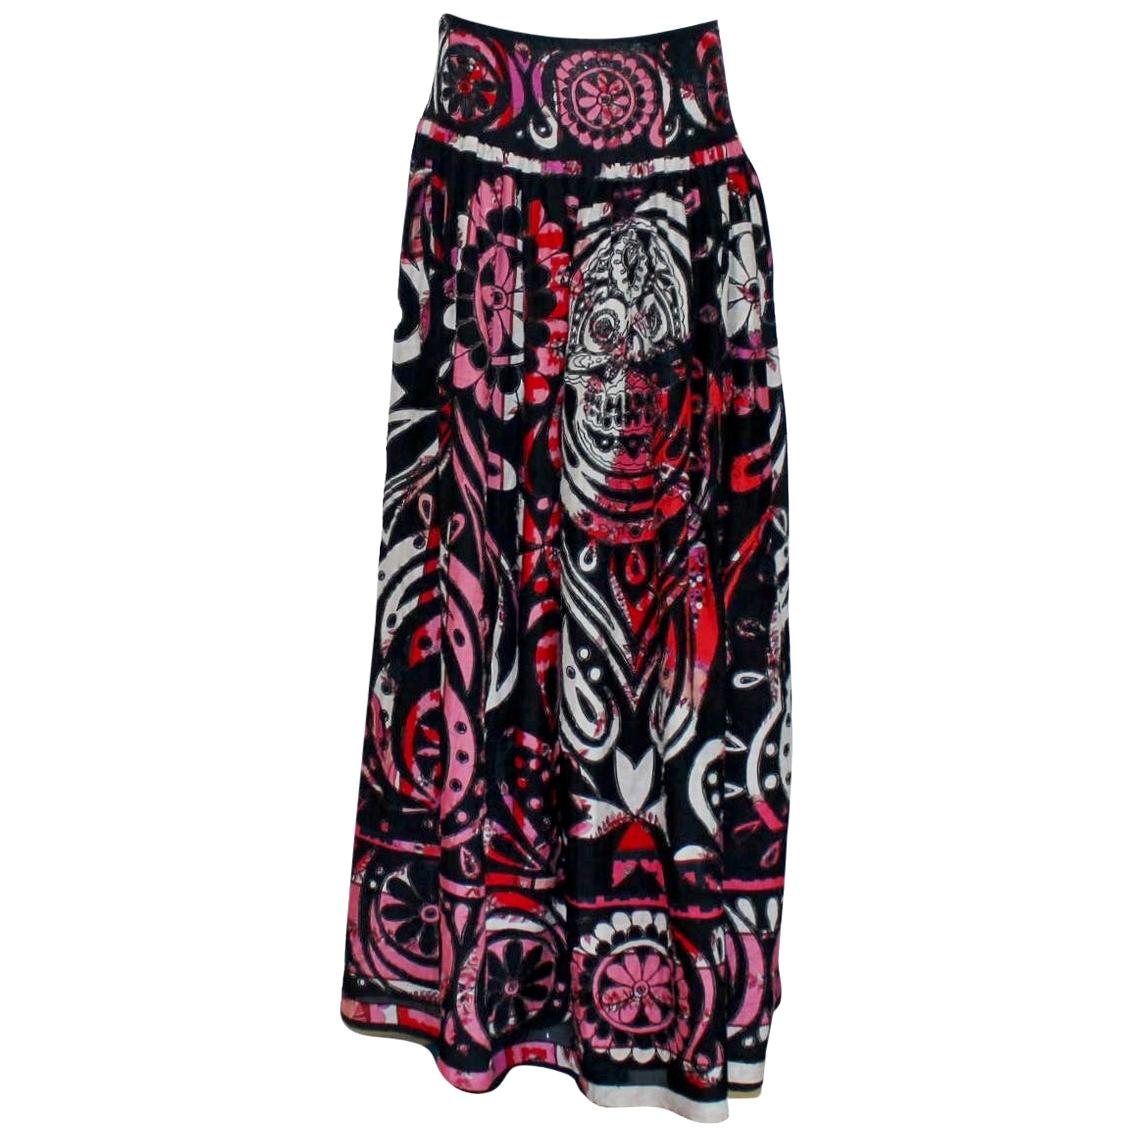 Rare Emilio Pucci by Peter Dundas Signature Patchwork Embroidered Maxi Skirt